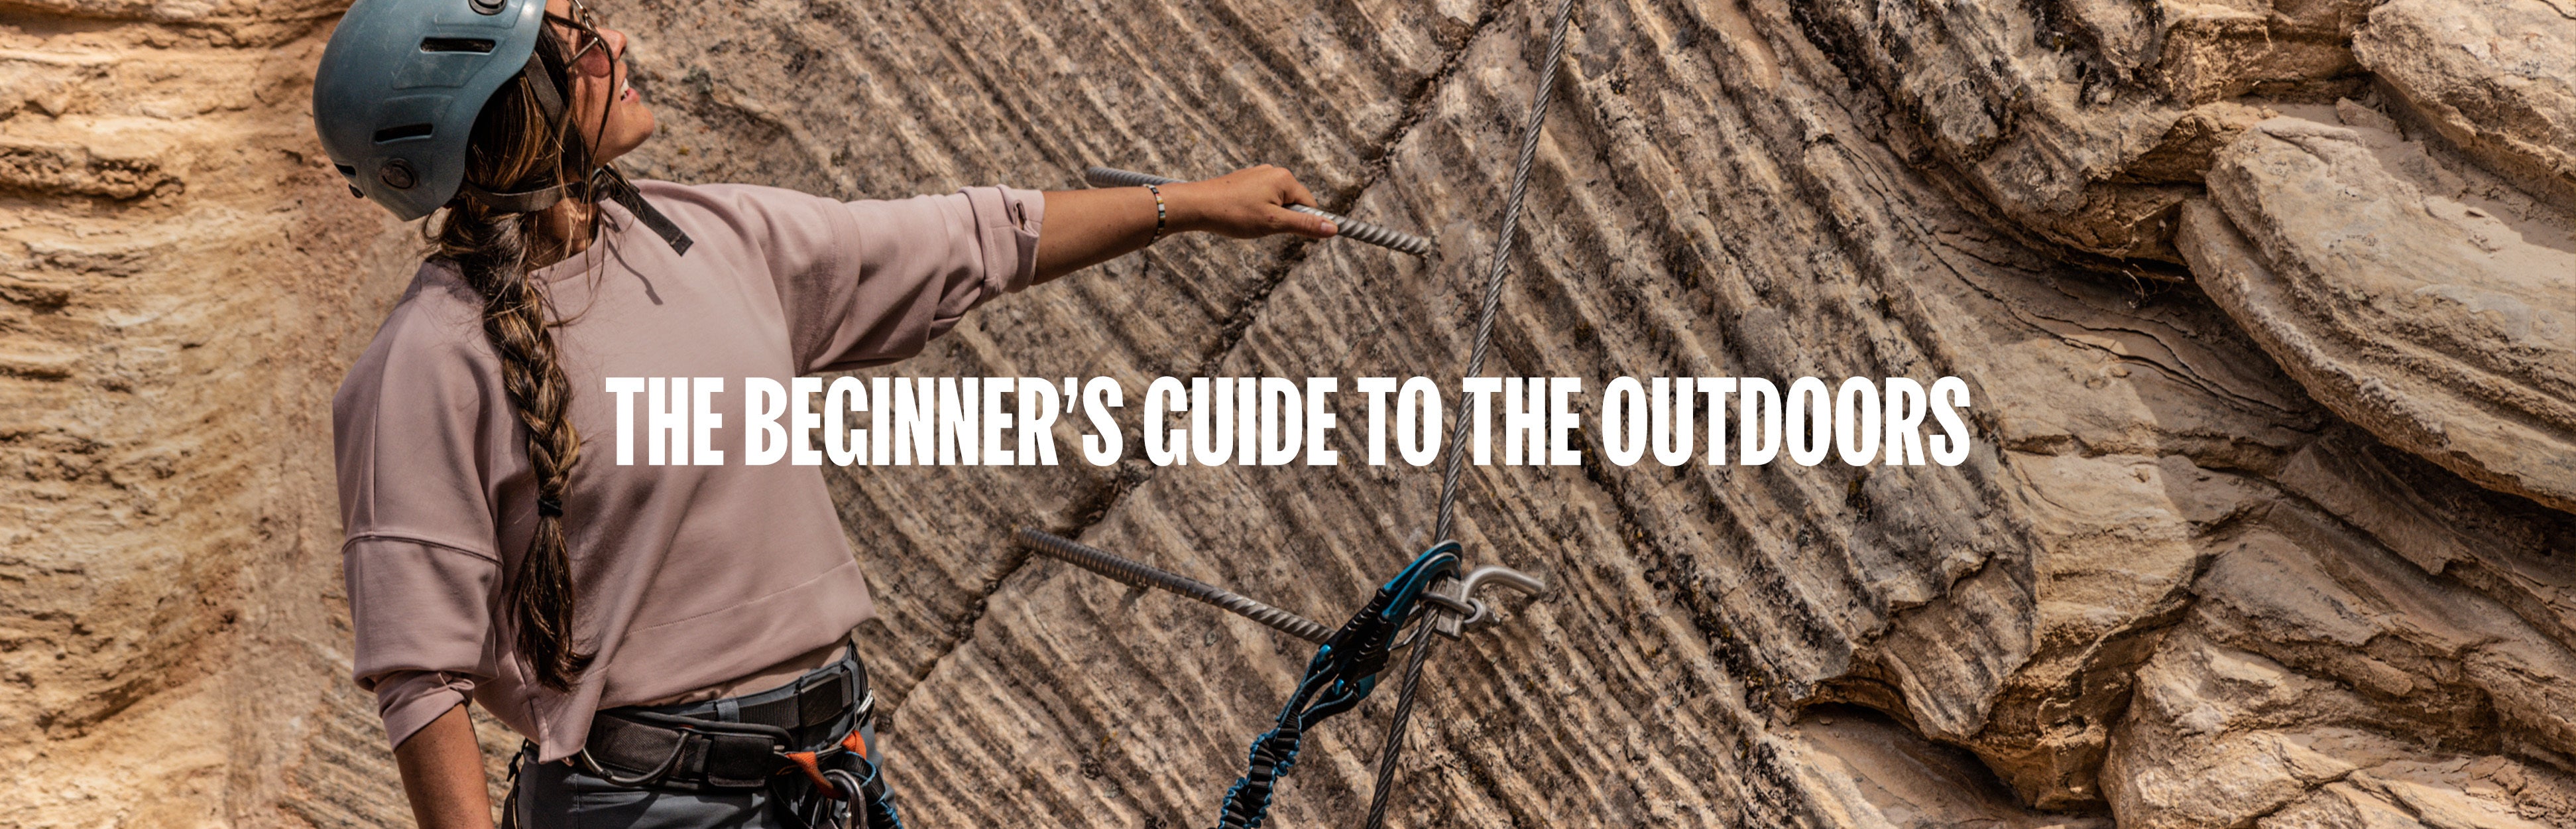 The Beginner's Guide to the Outdoors